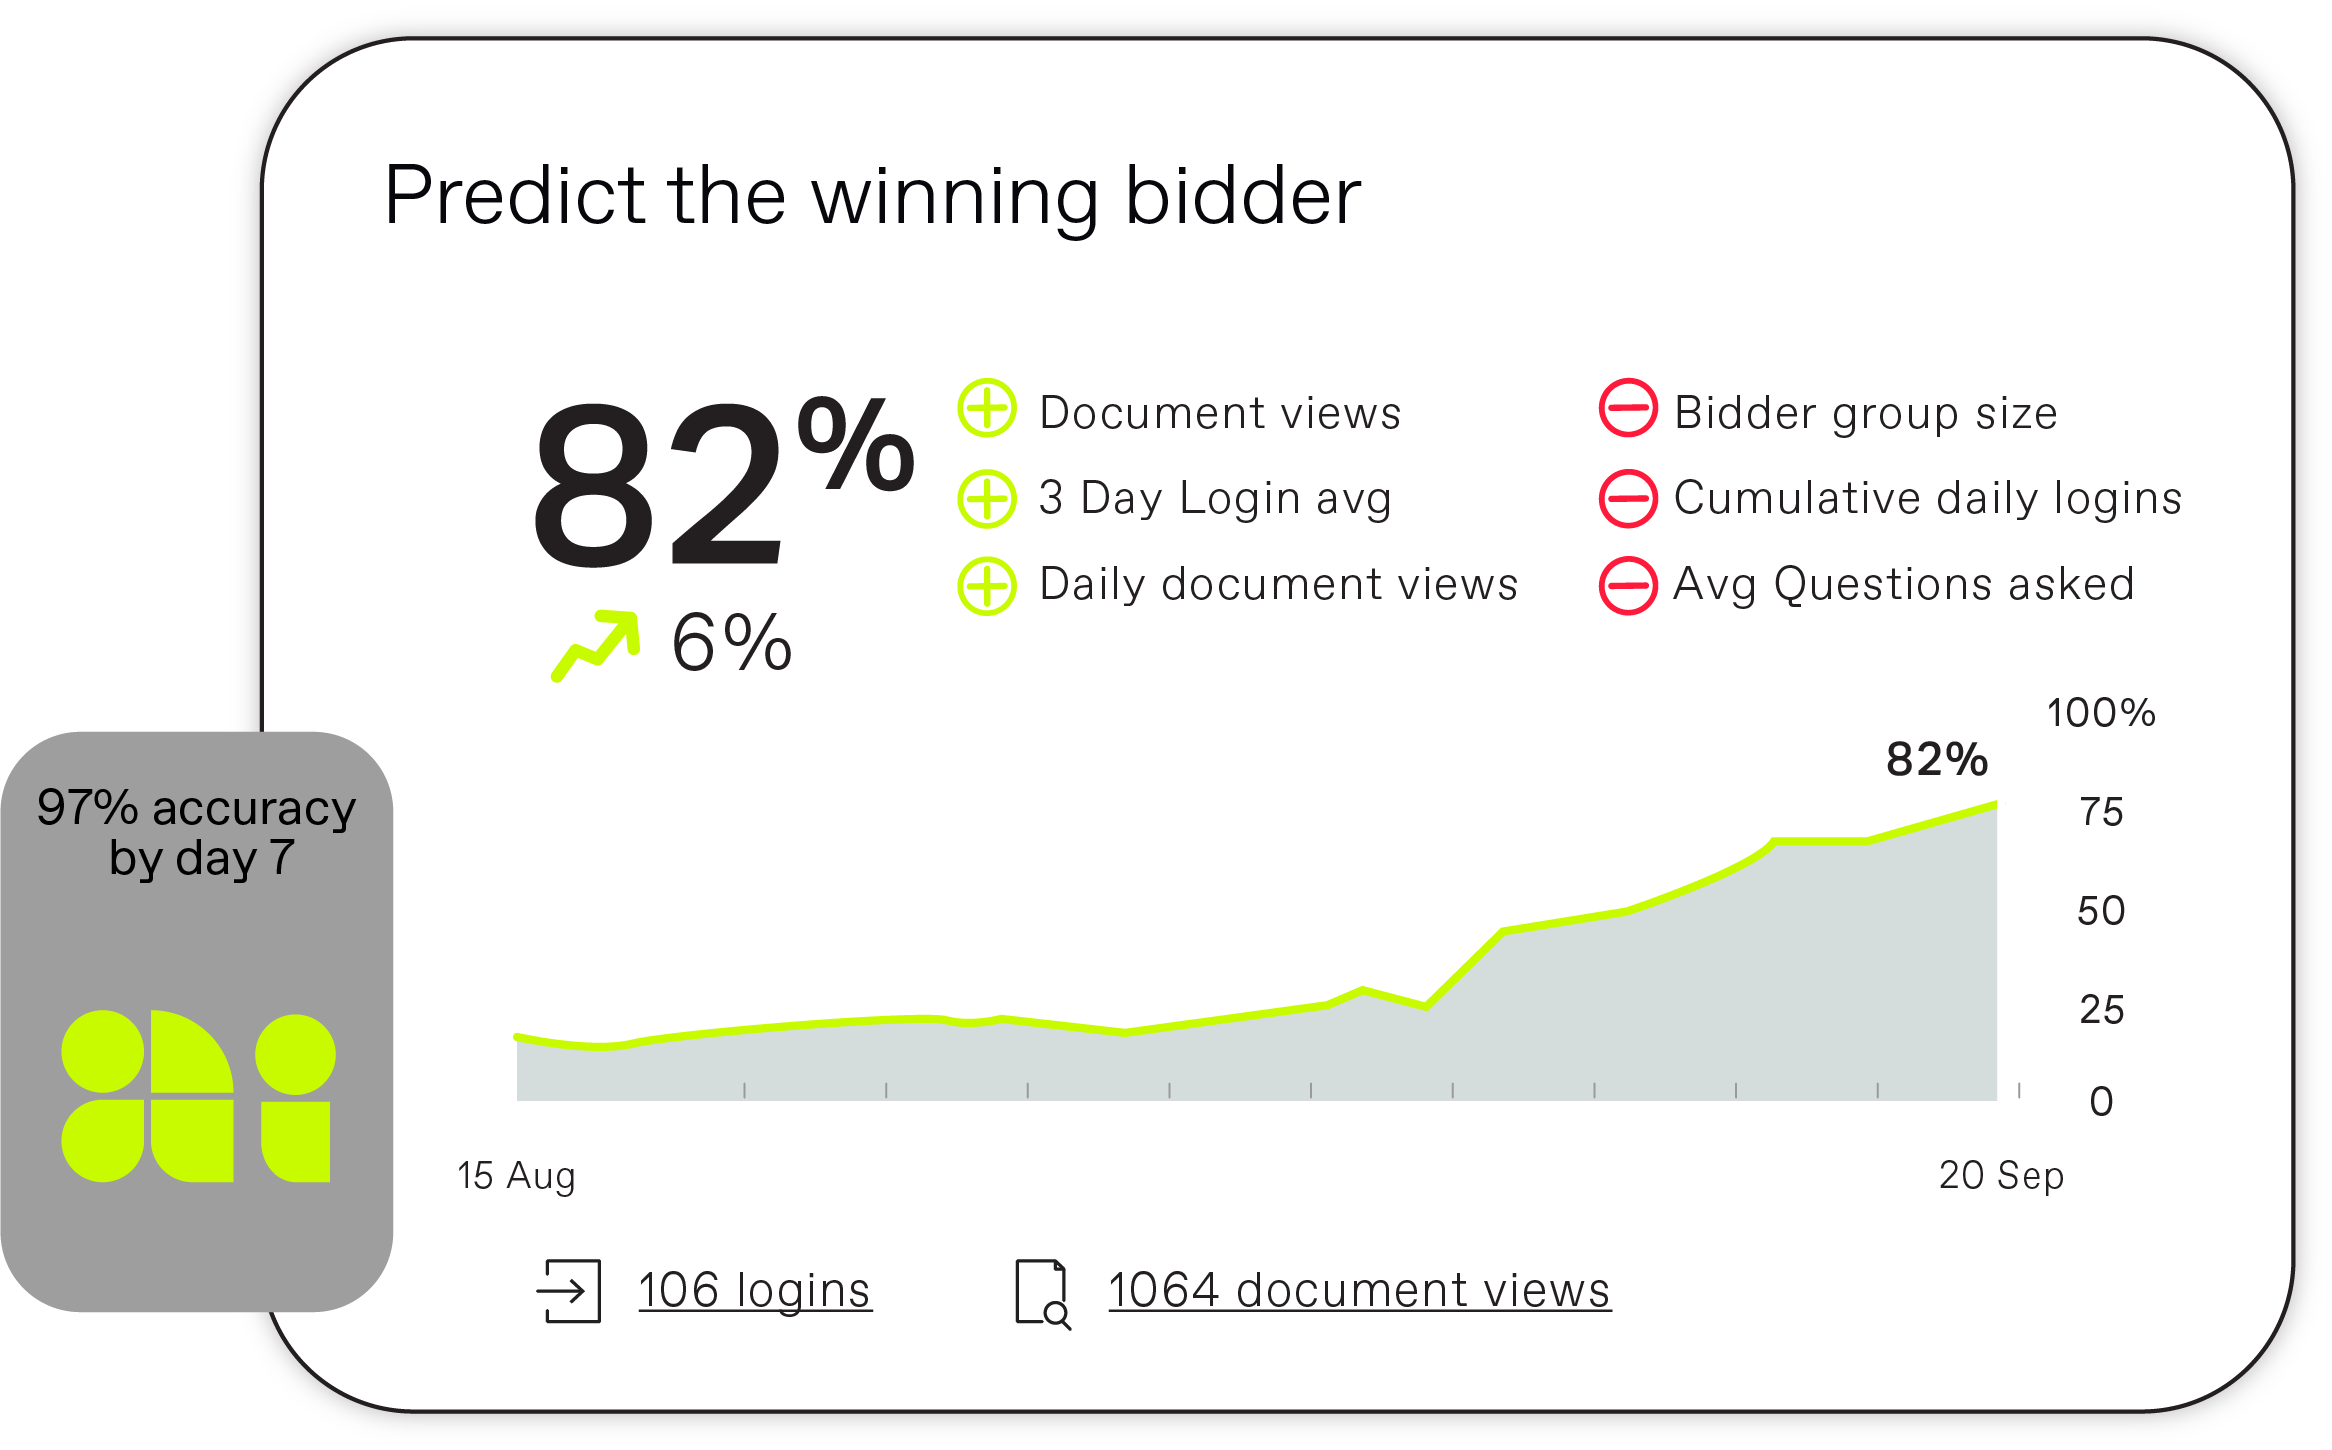 Bidder engagement score predicts with 97% accuracy